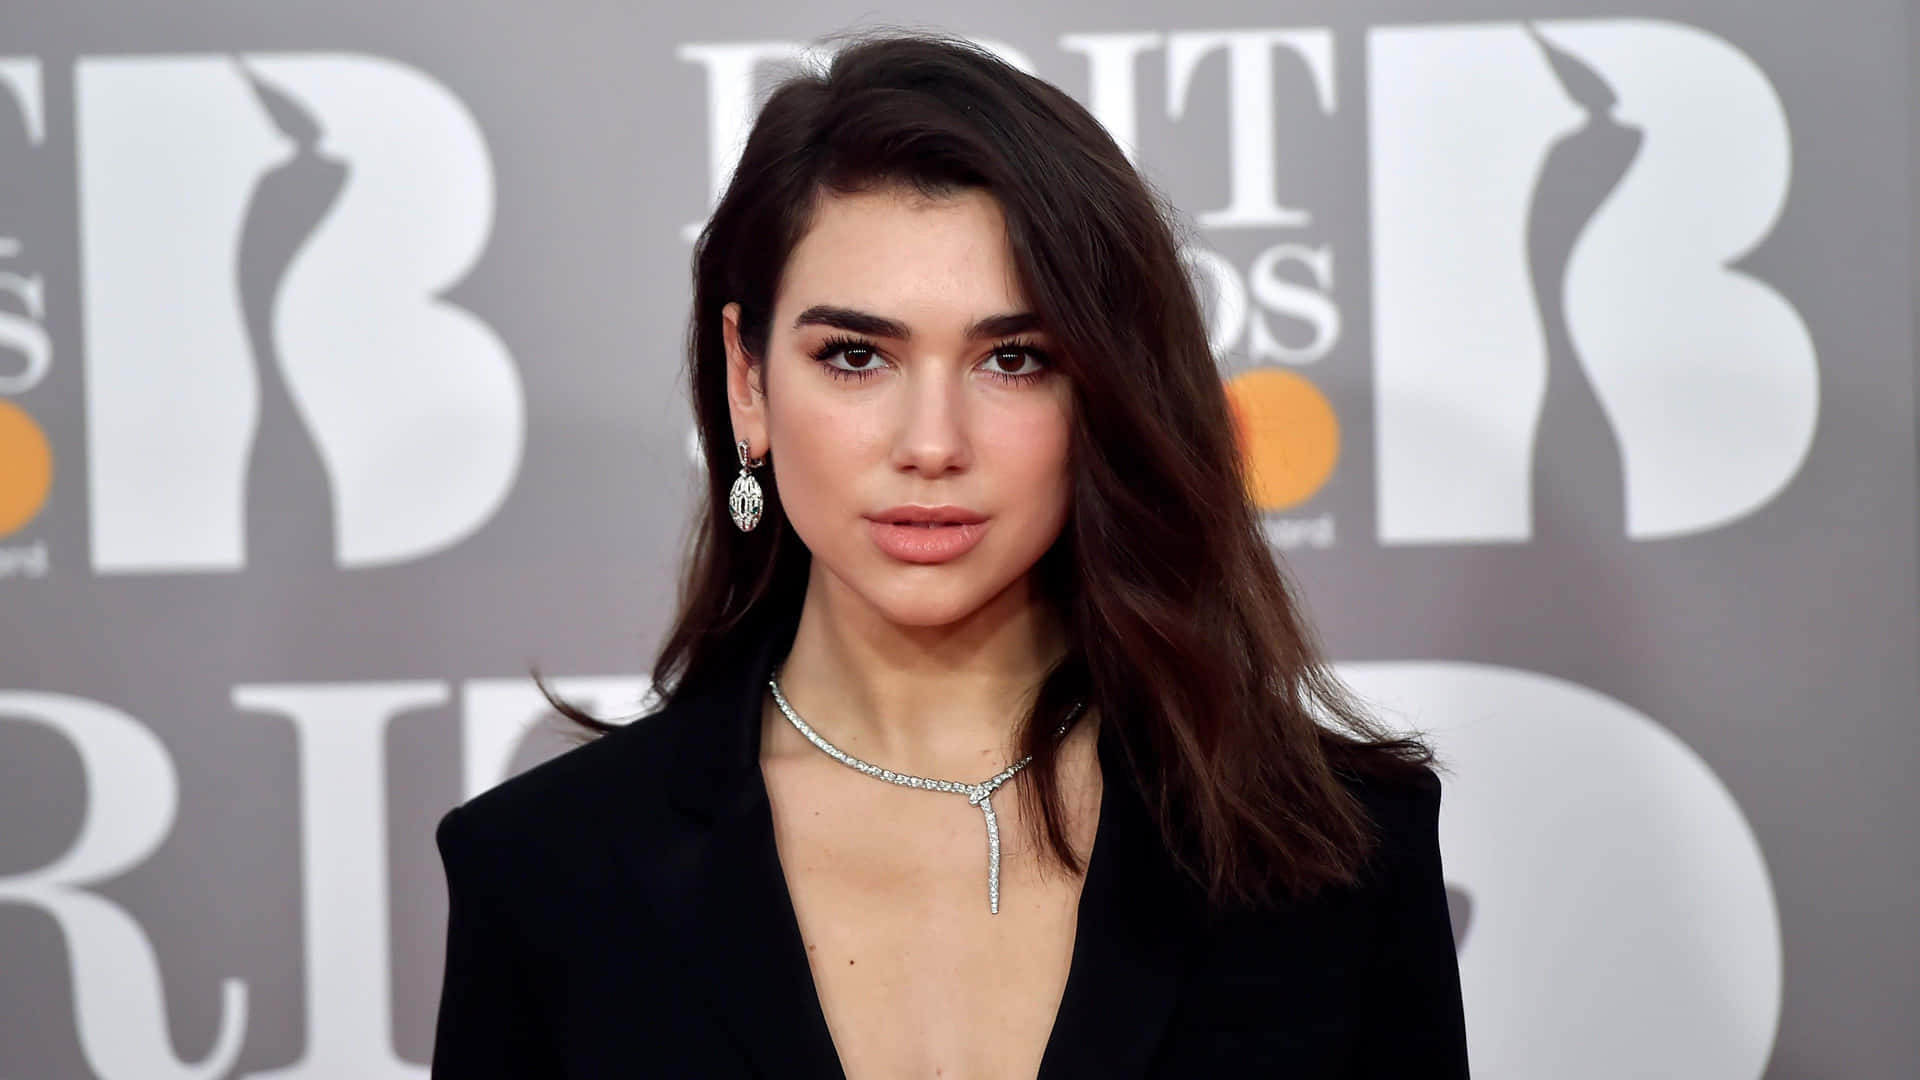 Dua Lipa posing in a stylish outfit during a photoshoot